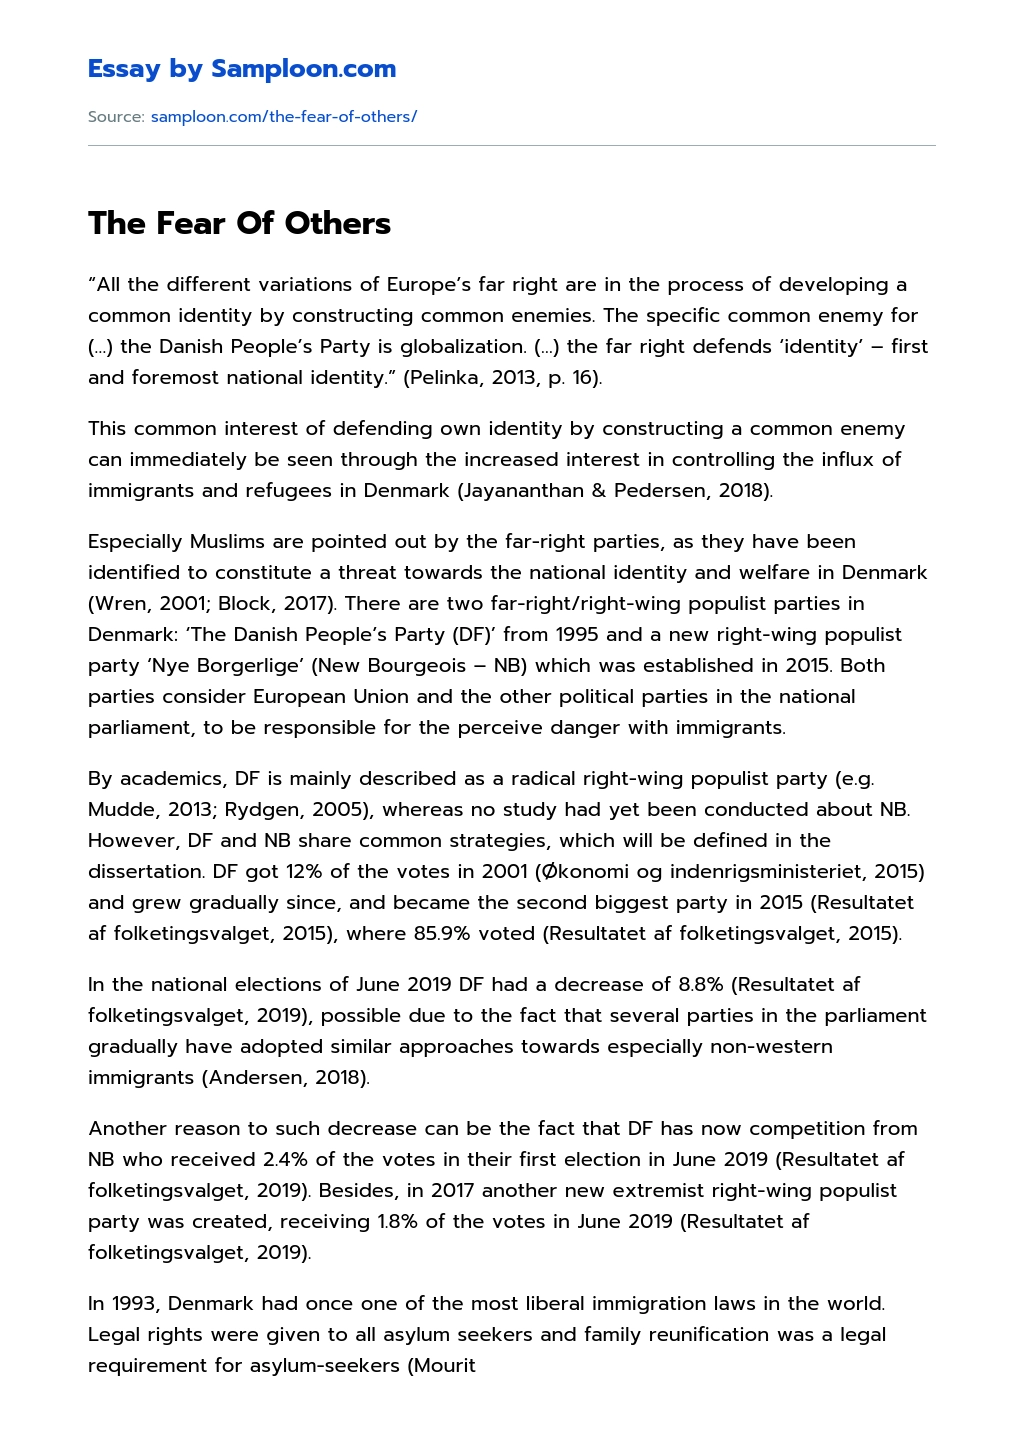 The Fear Of Others essay